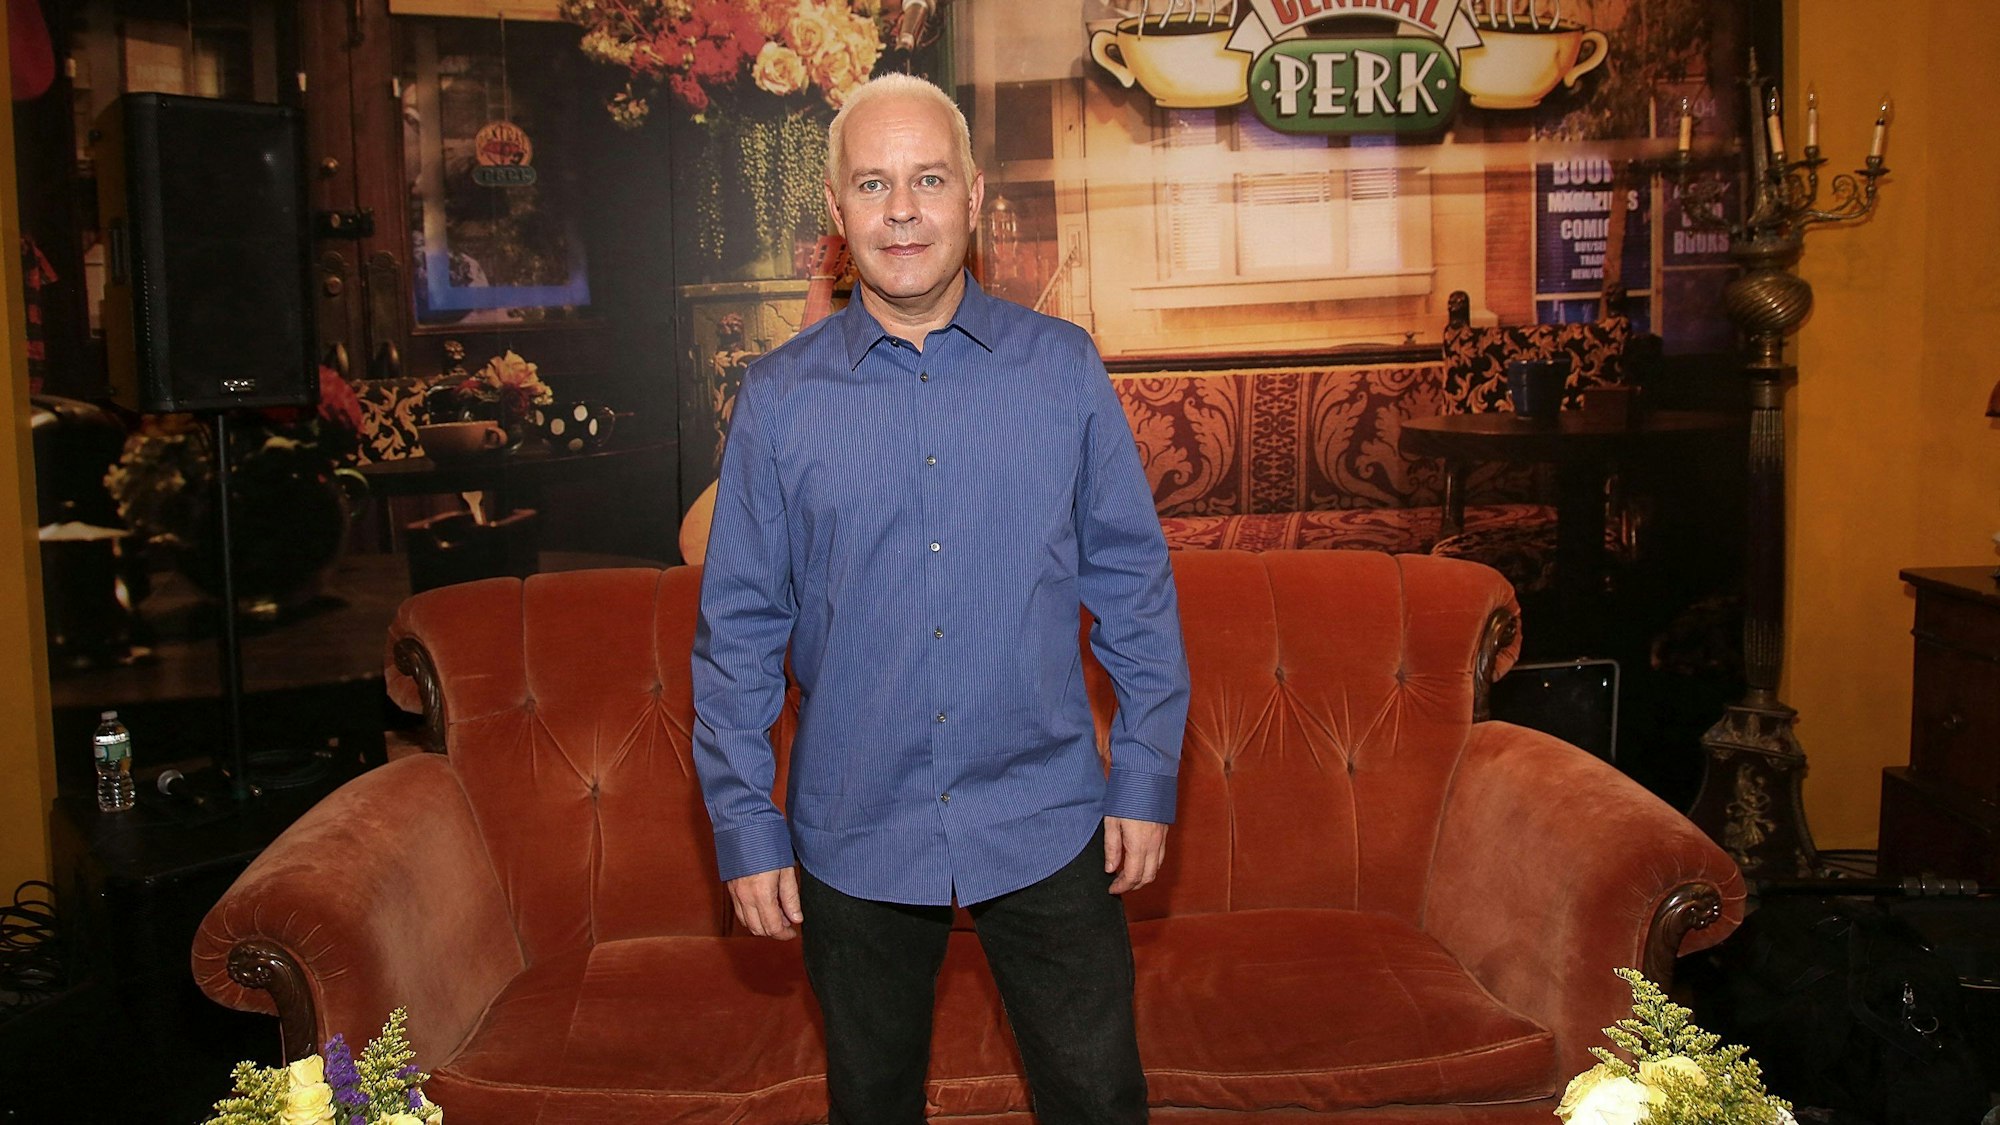 In this file photo actor James Michael Tyler attends the Central Perk Pop-Up Celebrating The 20th Anniversary Of "Friends" on September 16, 2014 in New York City. - Actor James Michael Tyler who played coffee shop manager Gunther on the hit sitcom "Friends" died October 24, 2021 at age 59, US media reported.